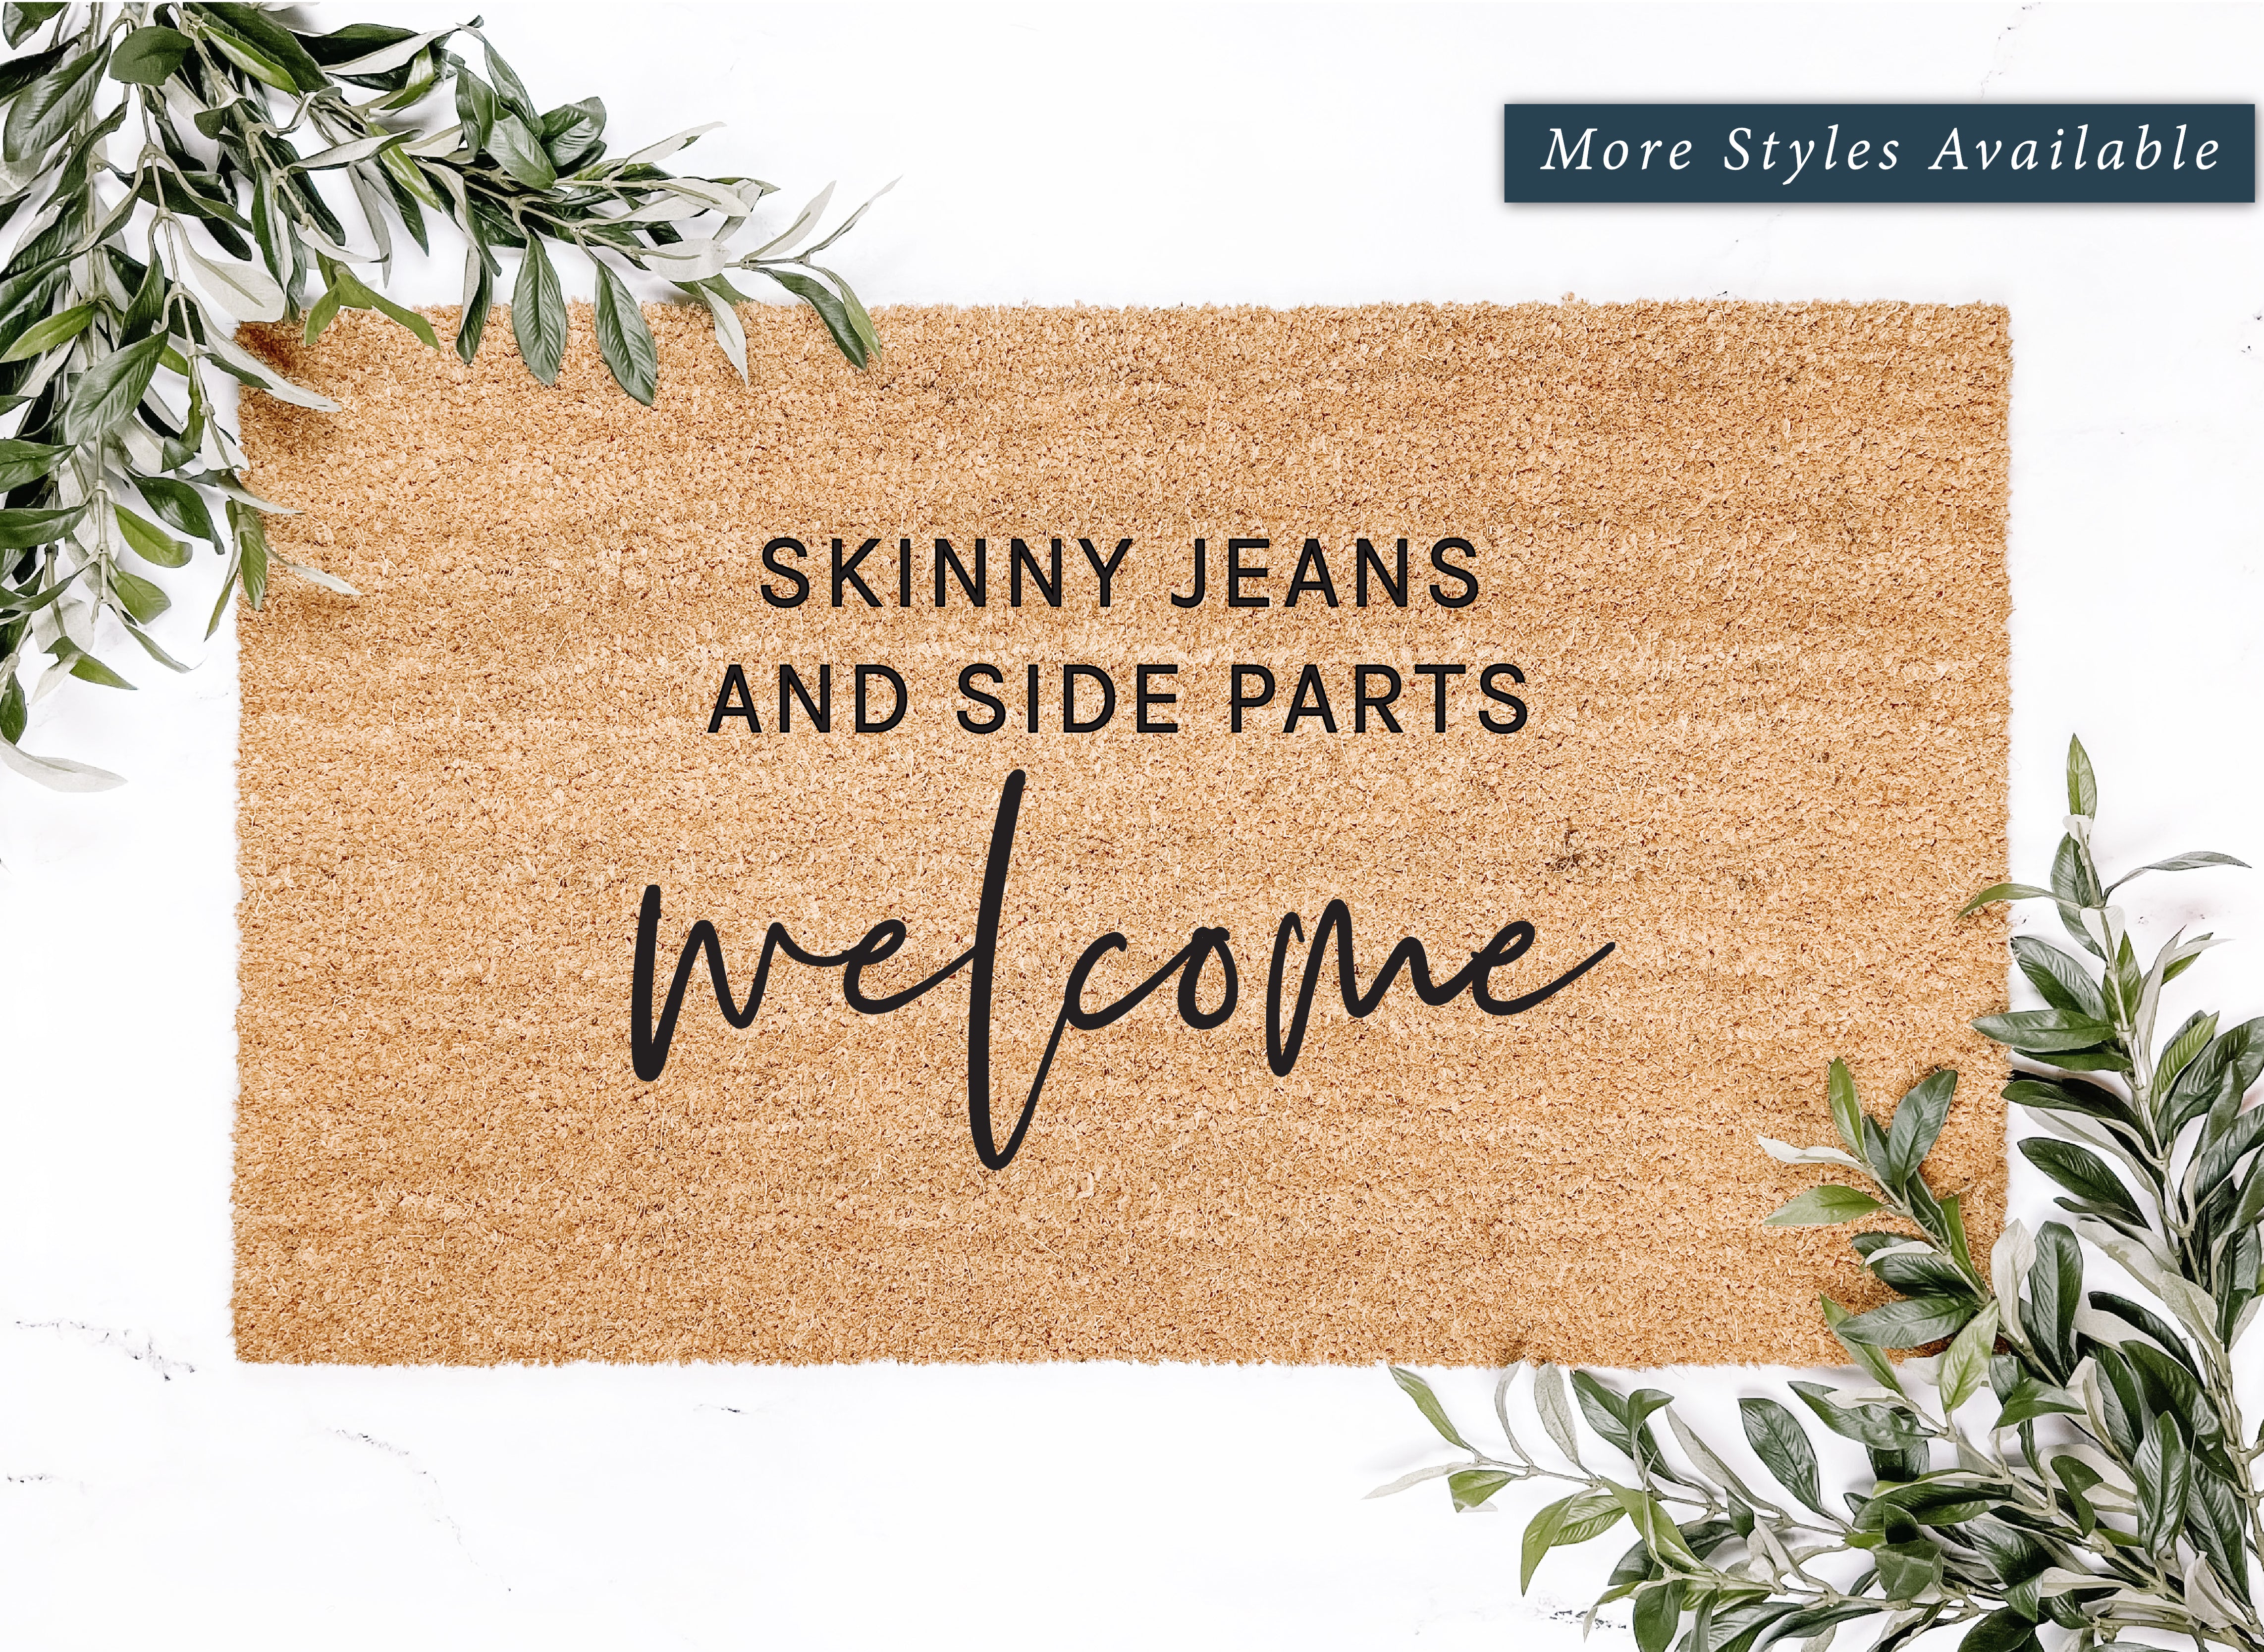 Side Parts and Skinny Jeans Welcome Doormat